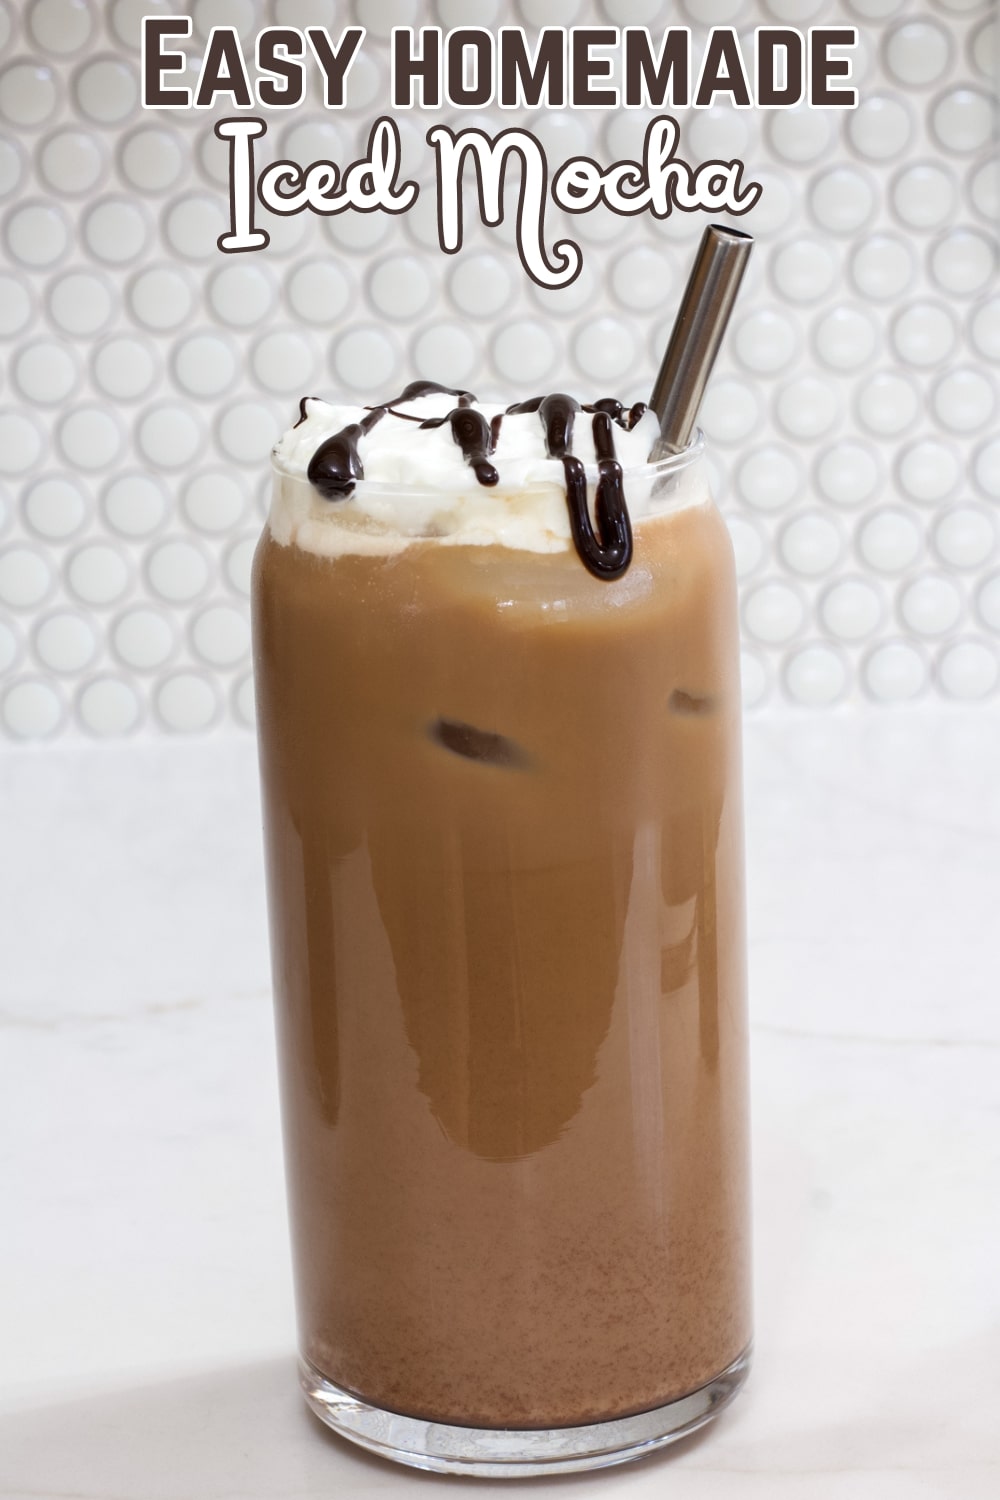 Make an easy iced mocha coffee recipe at home for a perfect summer beverage using coffee, milk and either chocolate sauce or cocoa powder and sugar!  Get the simple measurements and instructions here. via @mindyscookingobsession